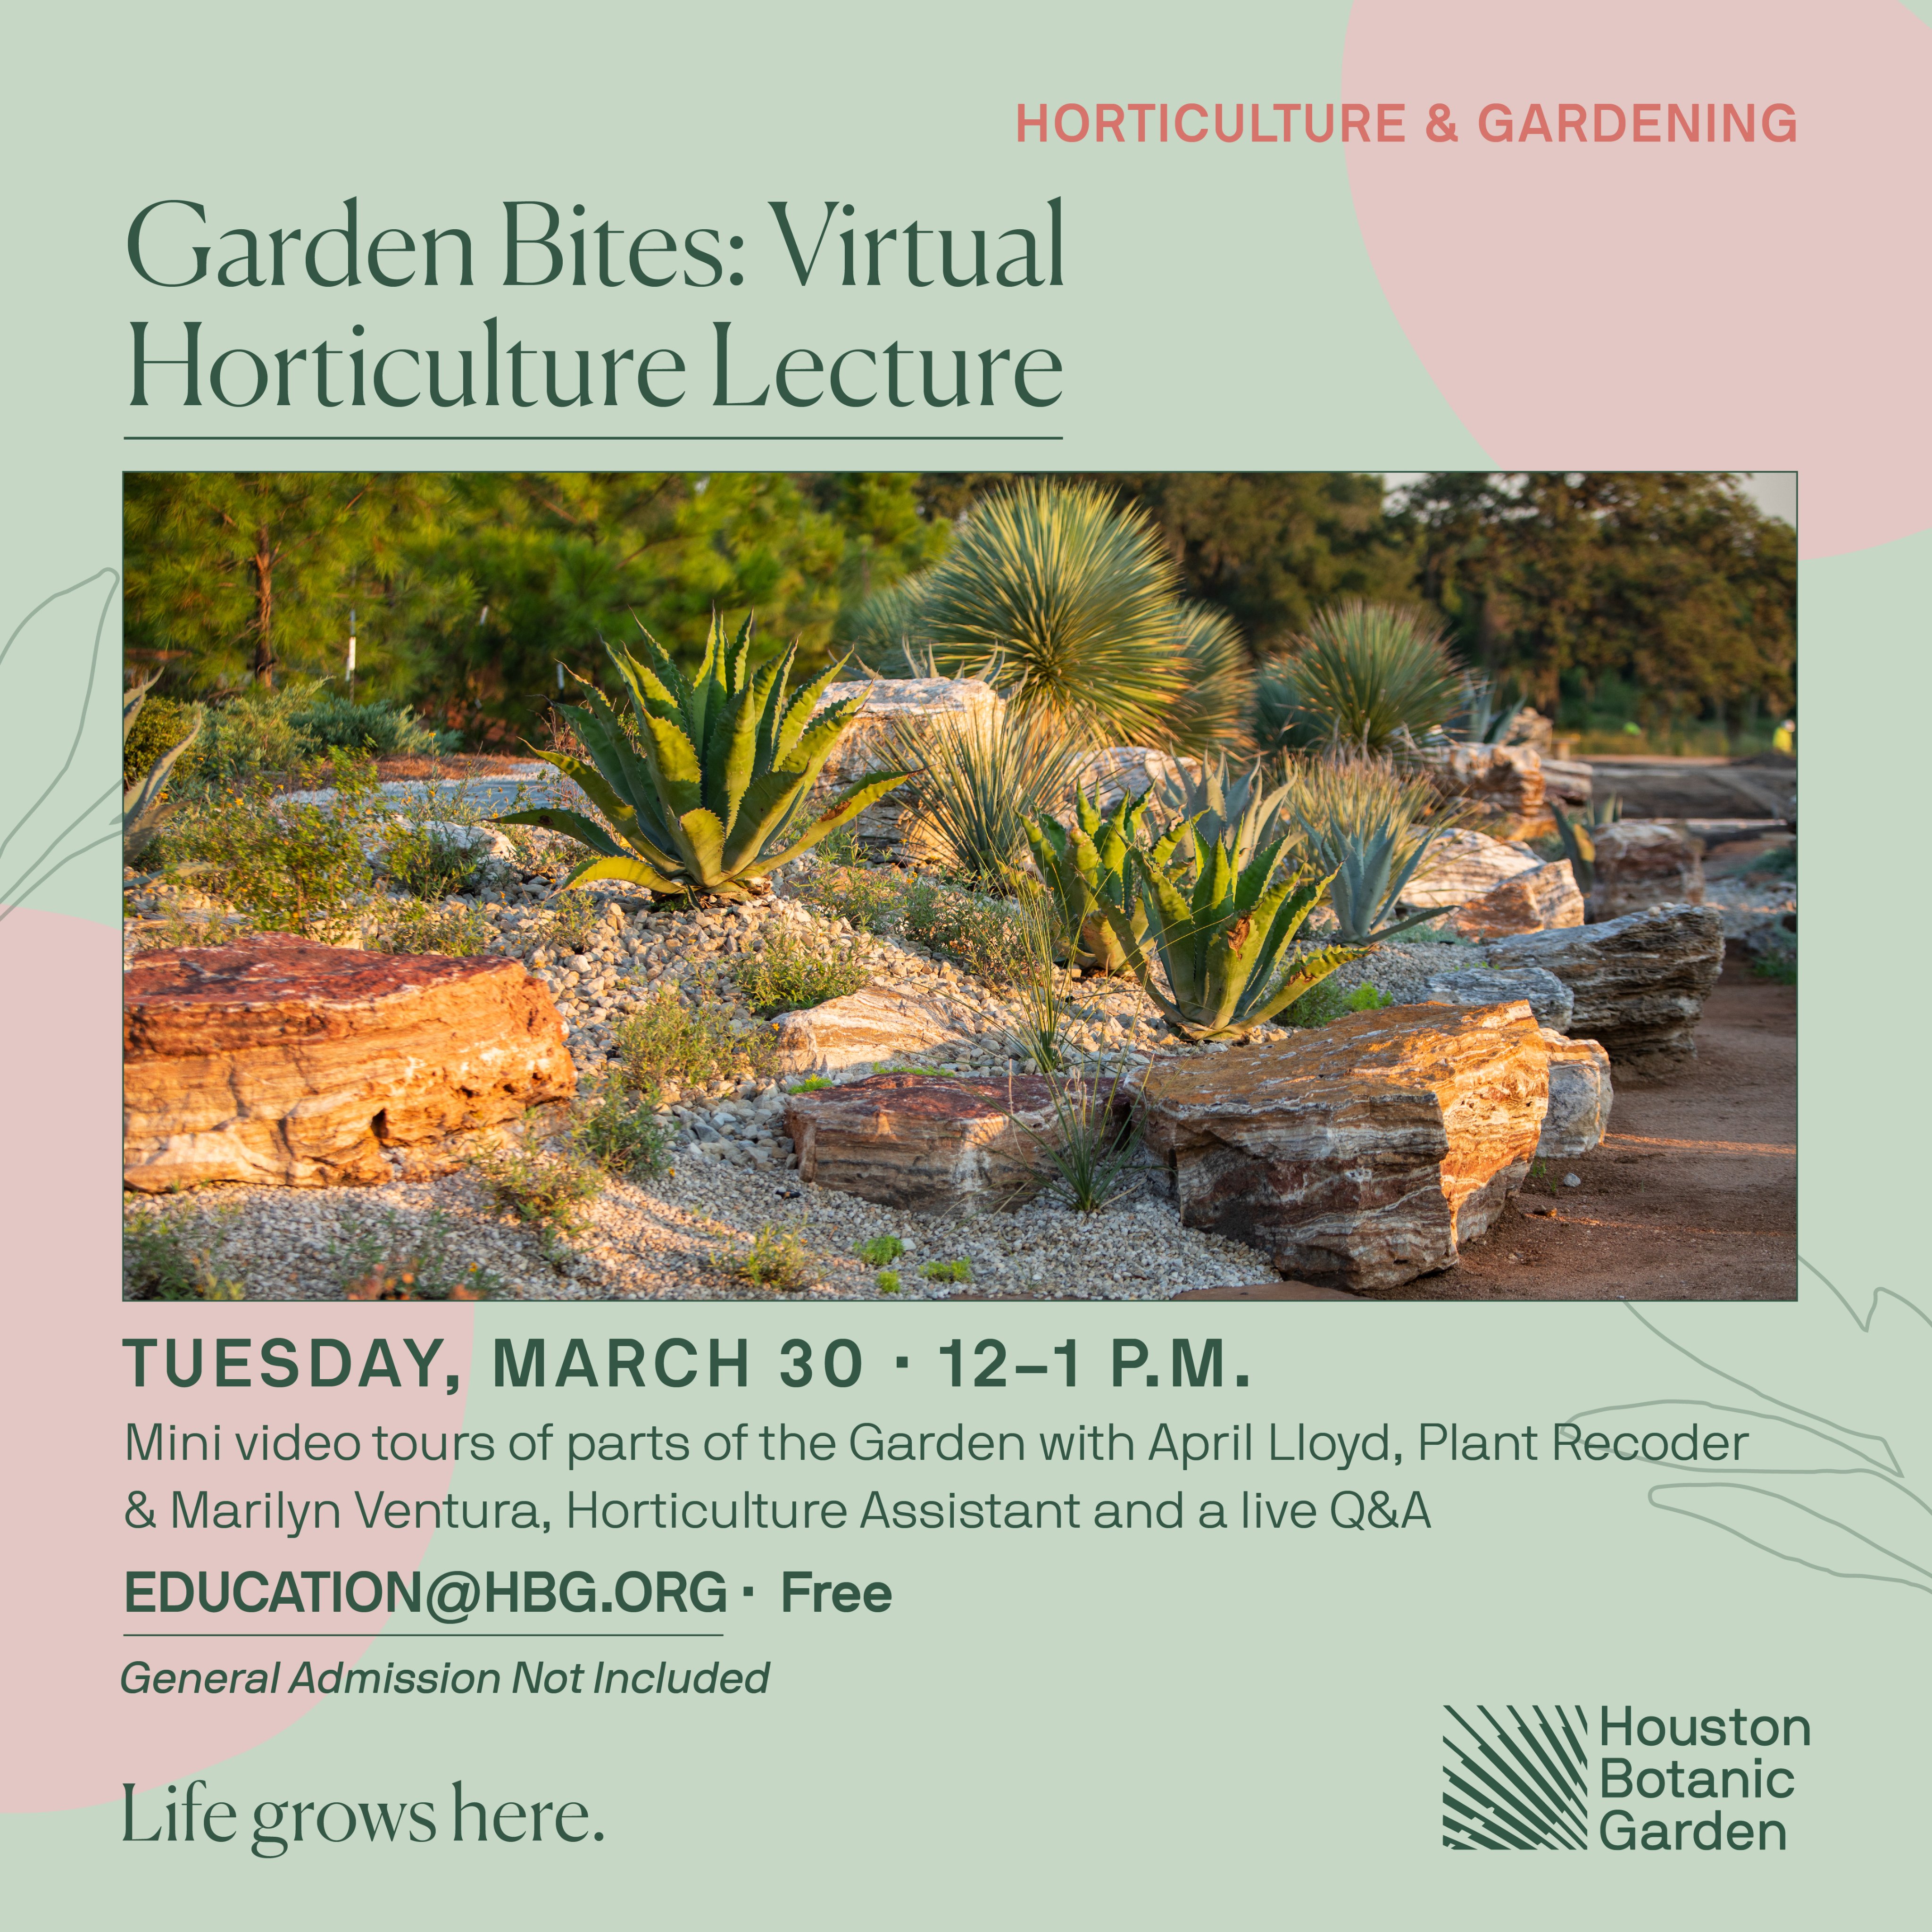 Horticulture video lecture